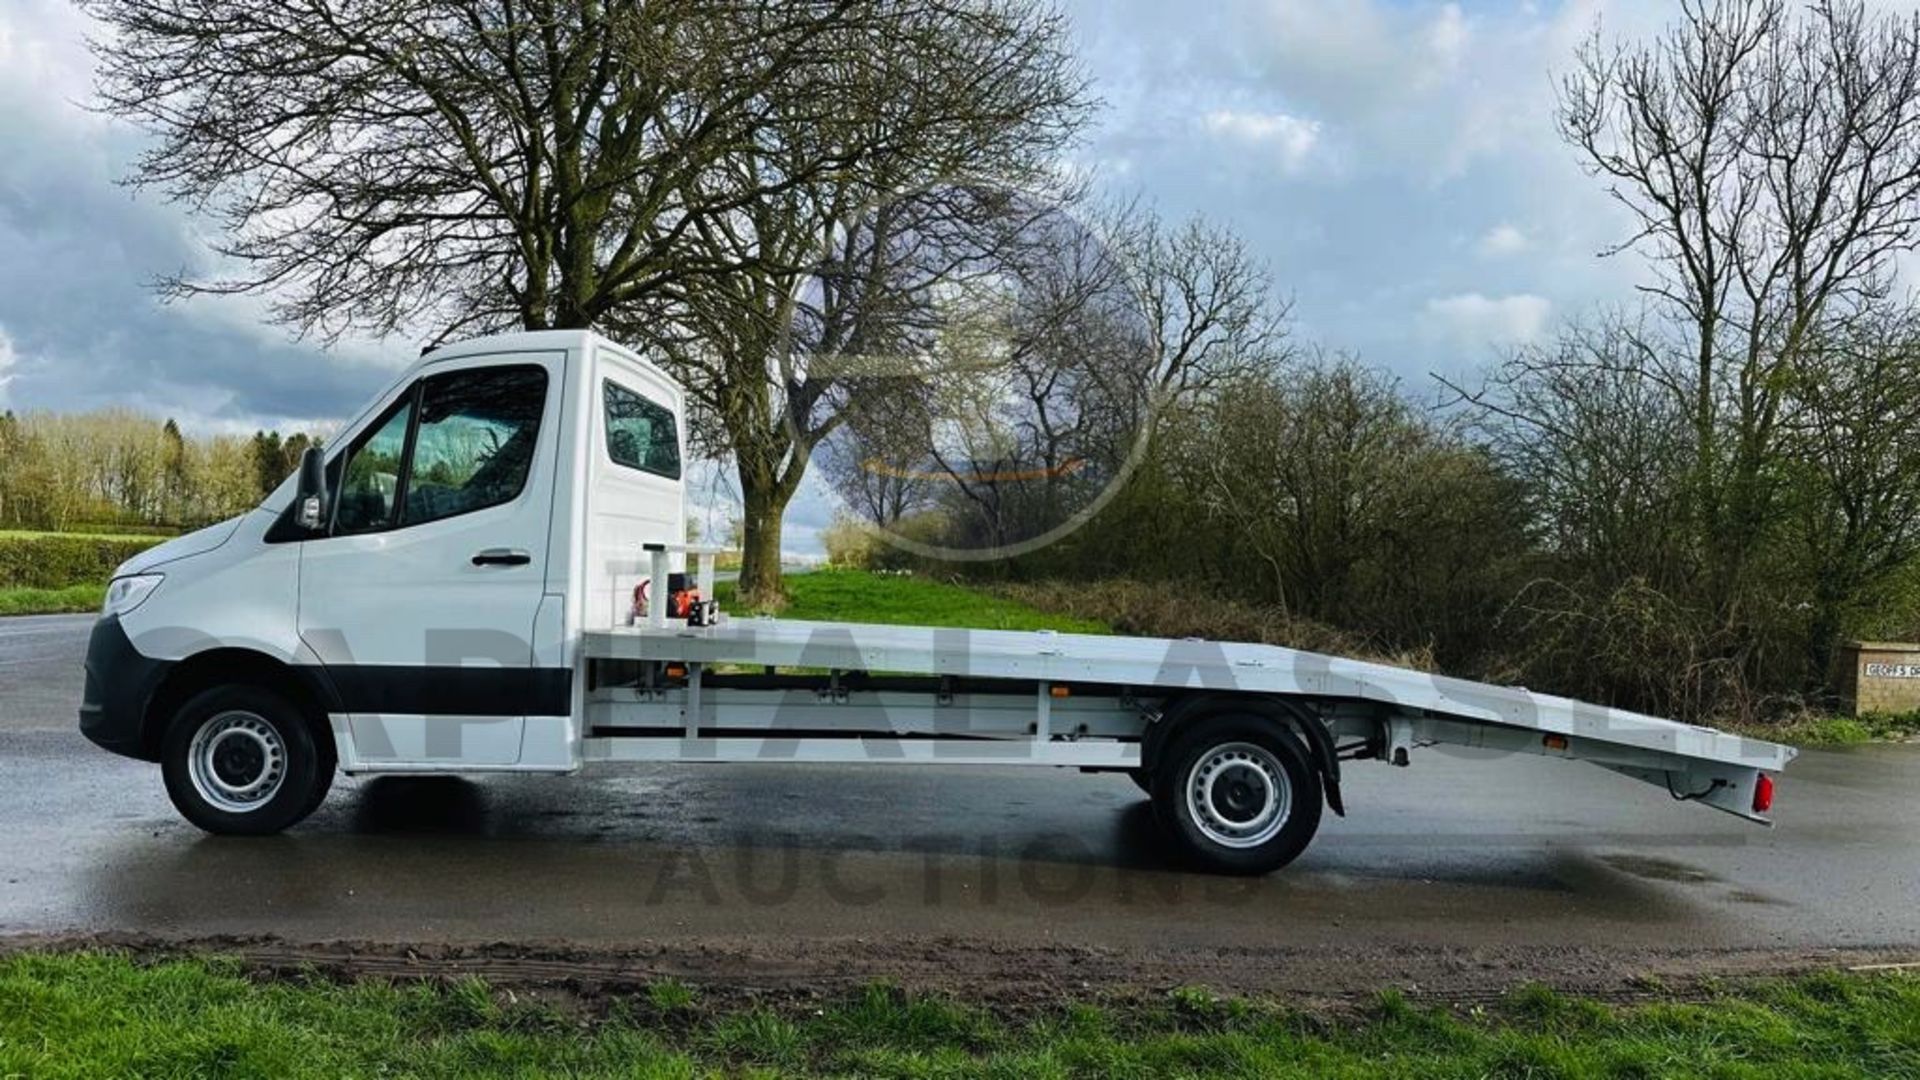 MERCEDES SPRINTER 314CDI "LWB RECOVERY TRUCK" 2019 MODEL - 1 OWNER - NEW BODY FITTED WITH ELEC WINCH - Image 10 of 37